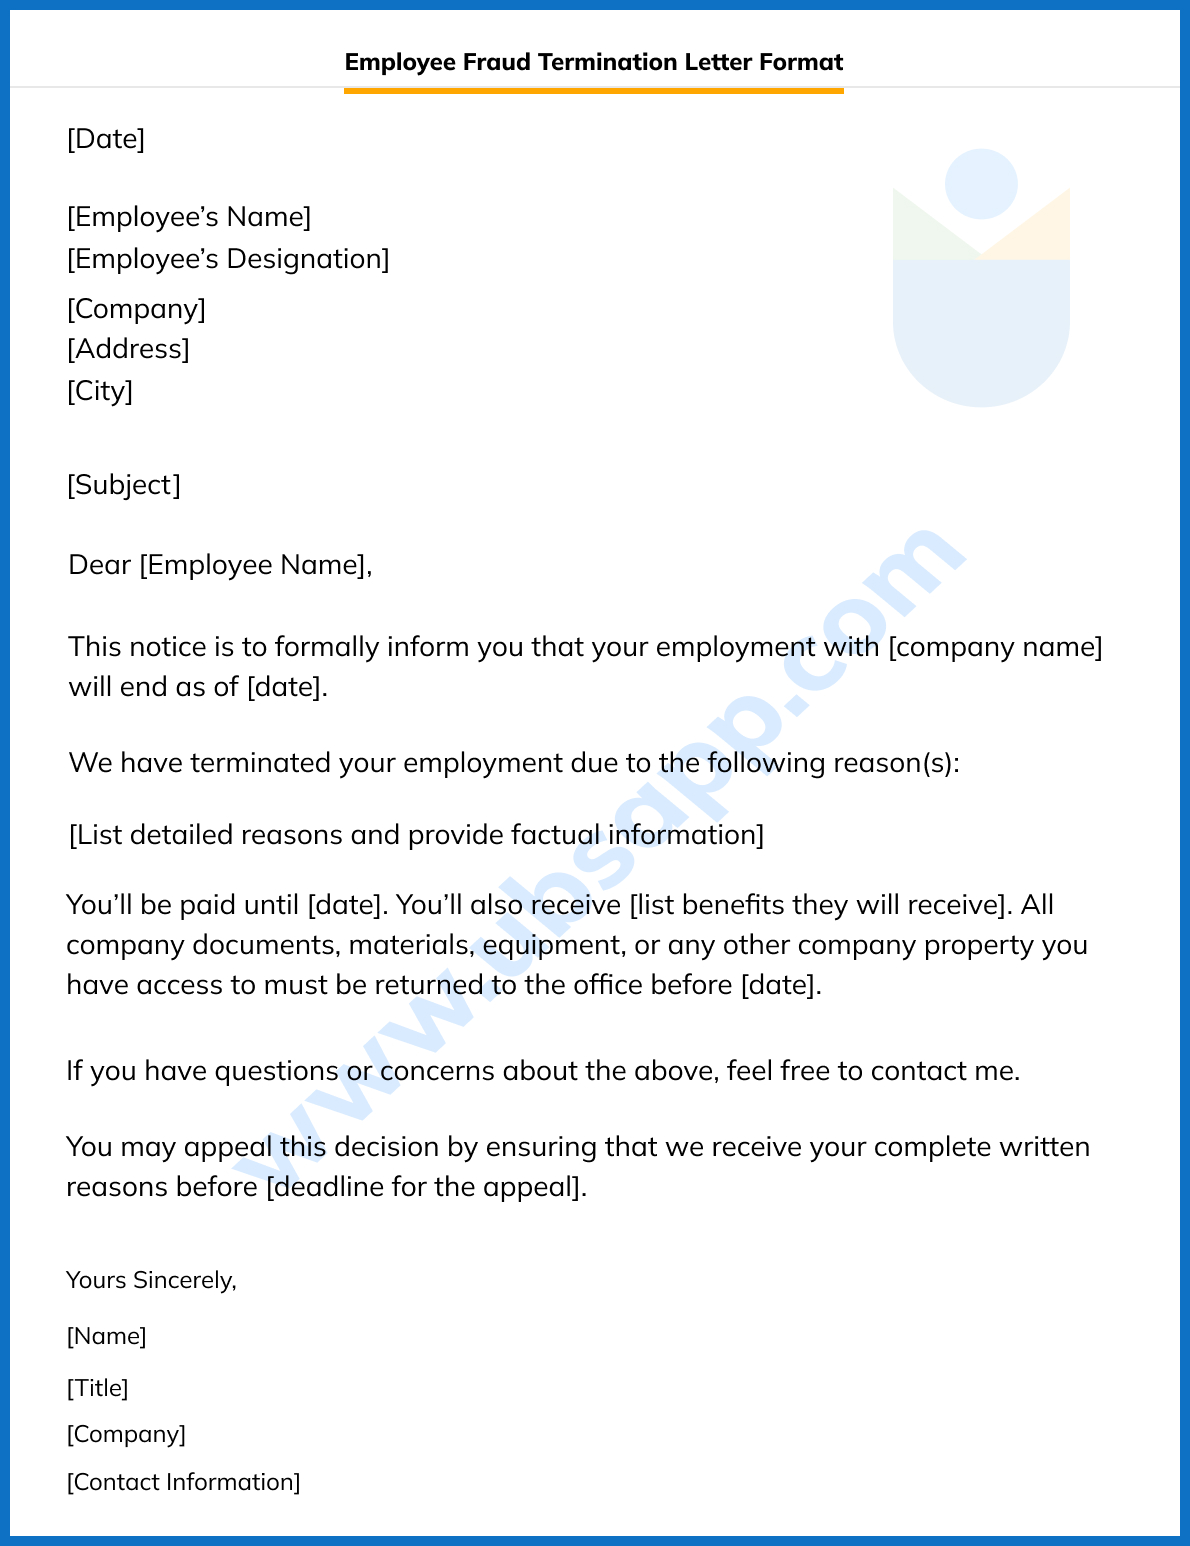 Employee Fraud Termination Letter Format